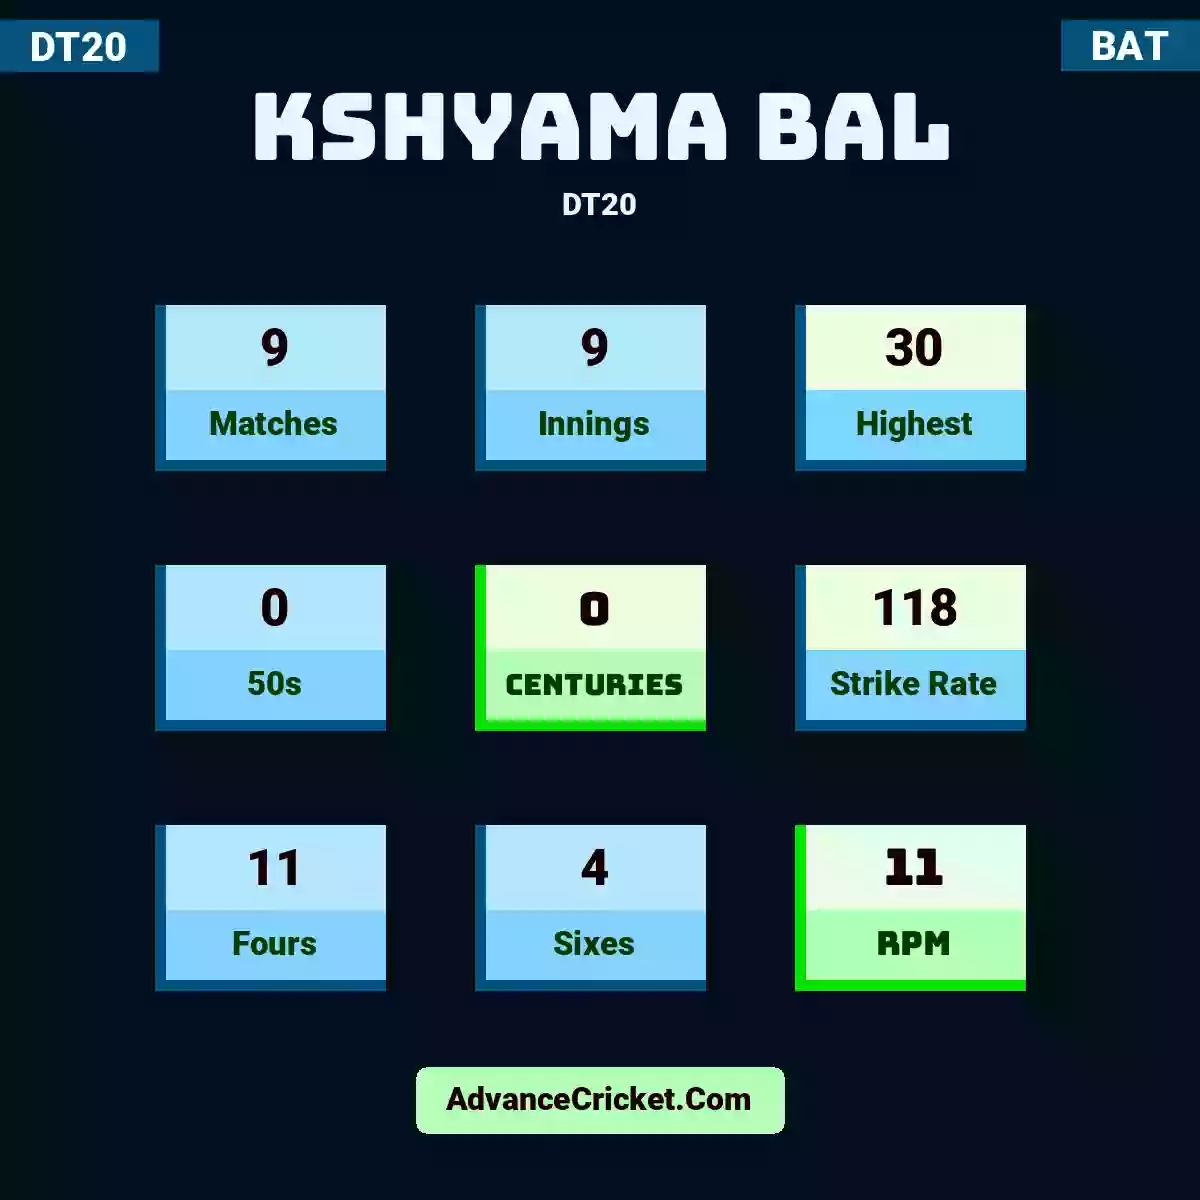 Kshyama Bal DT20 , Kshyama Bal played 9 matches, scored 30 runs as highest, 0 half-centuries, and 0 centuries, with a strike rate of 118. K.Bal hit 11 fours and 4 sixes, with an RPM of 11.